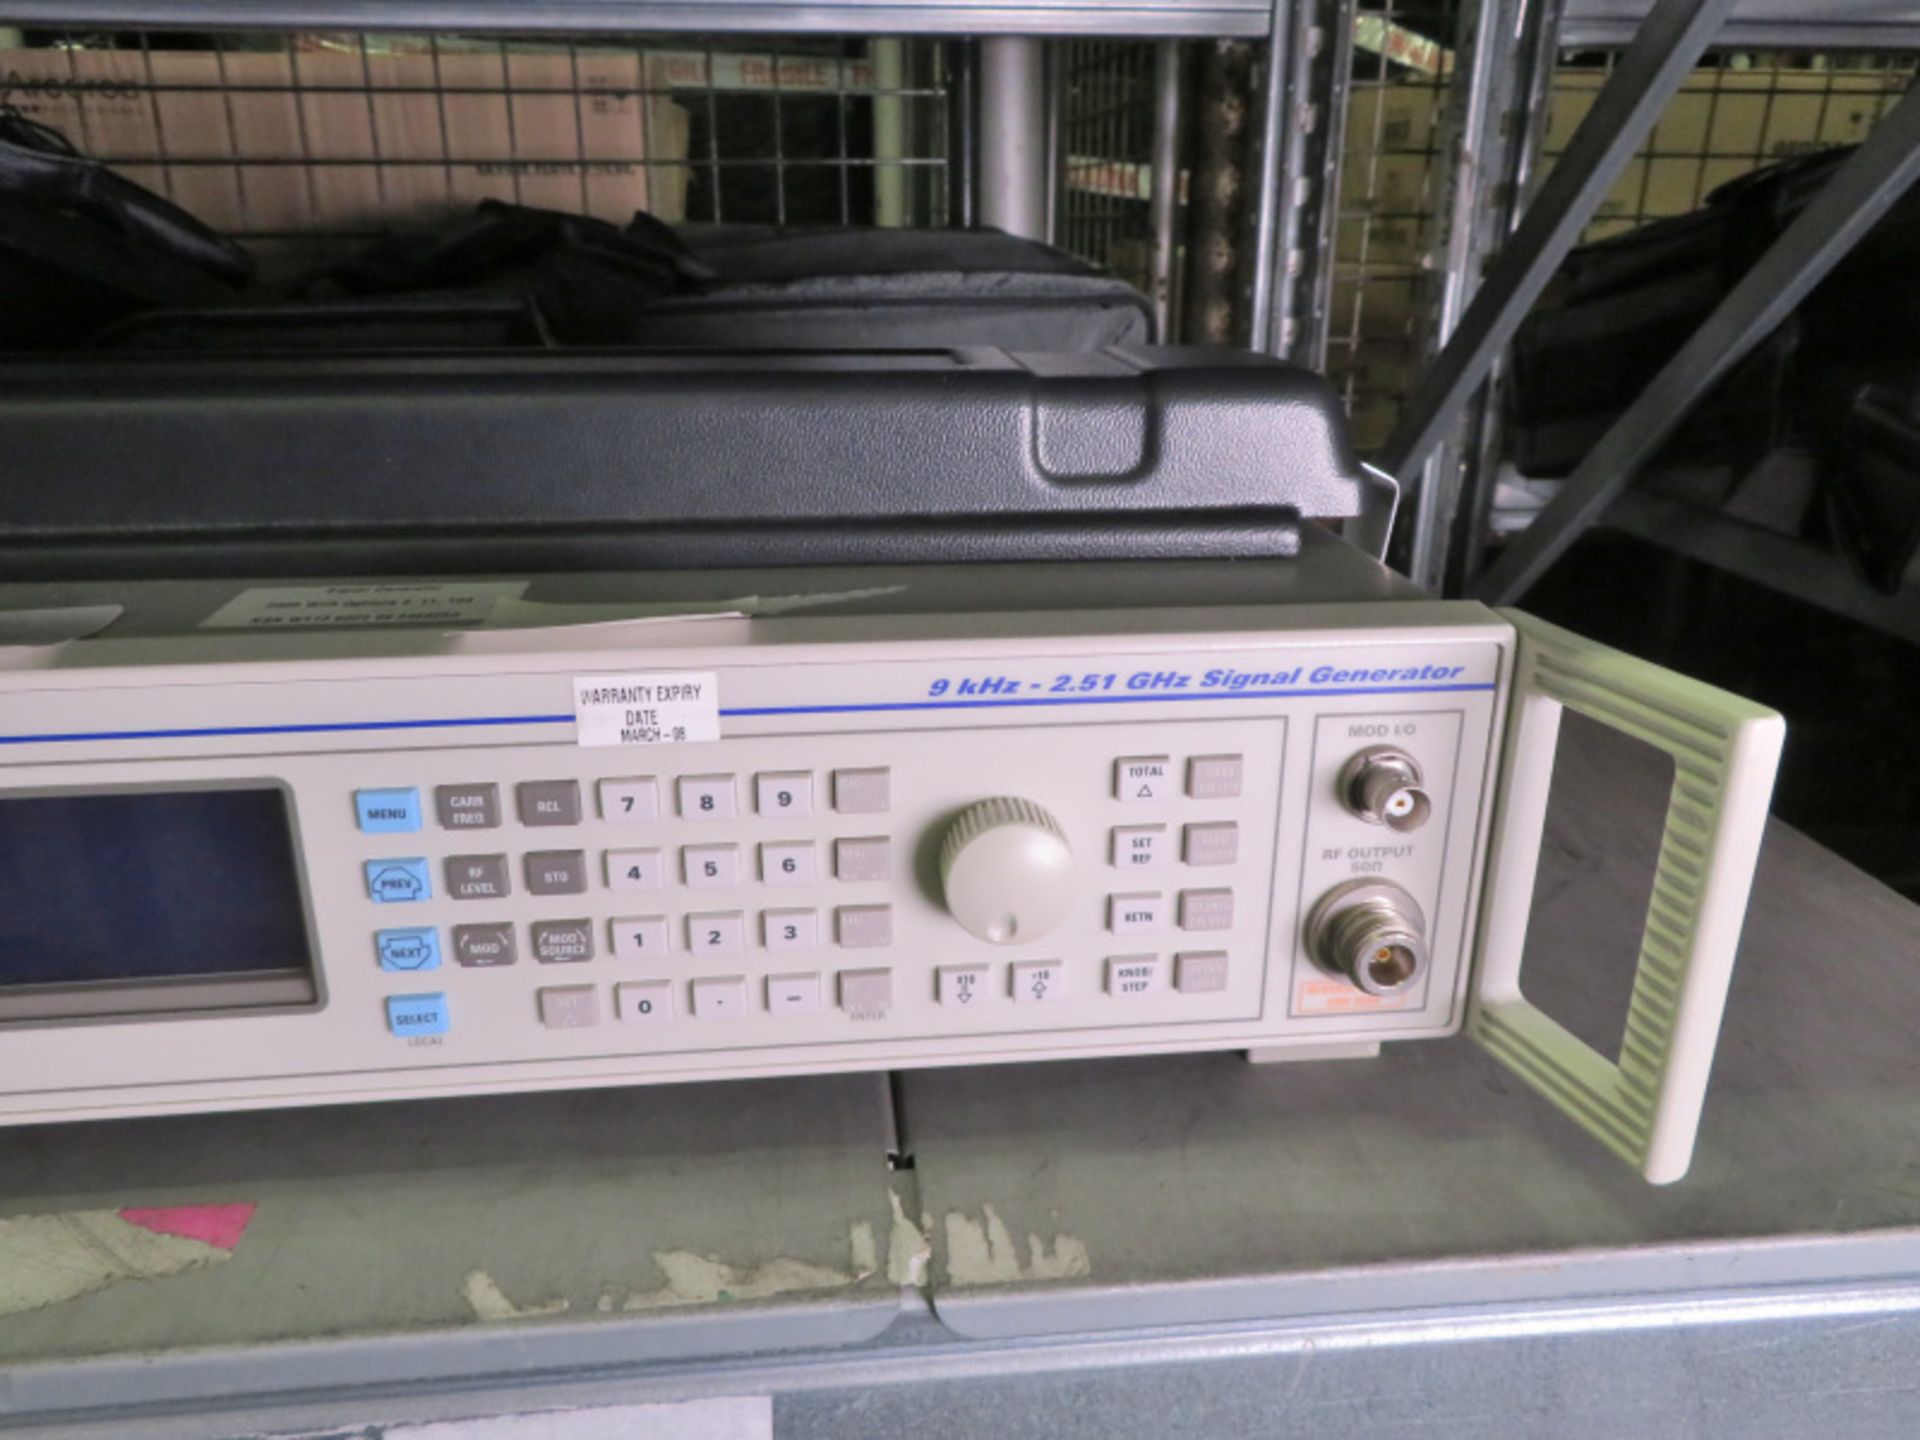 IFR 2025 Signal Generator 9kHz-2.51 GHz - Image 3 of 3